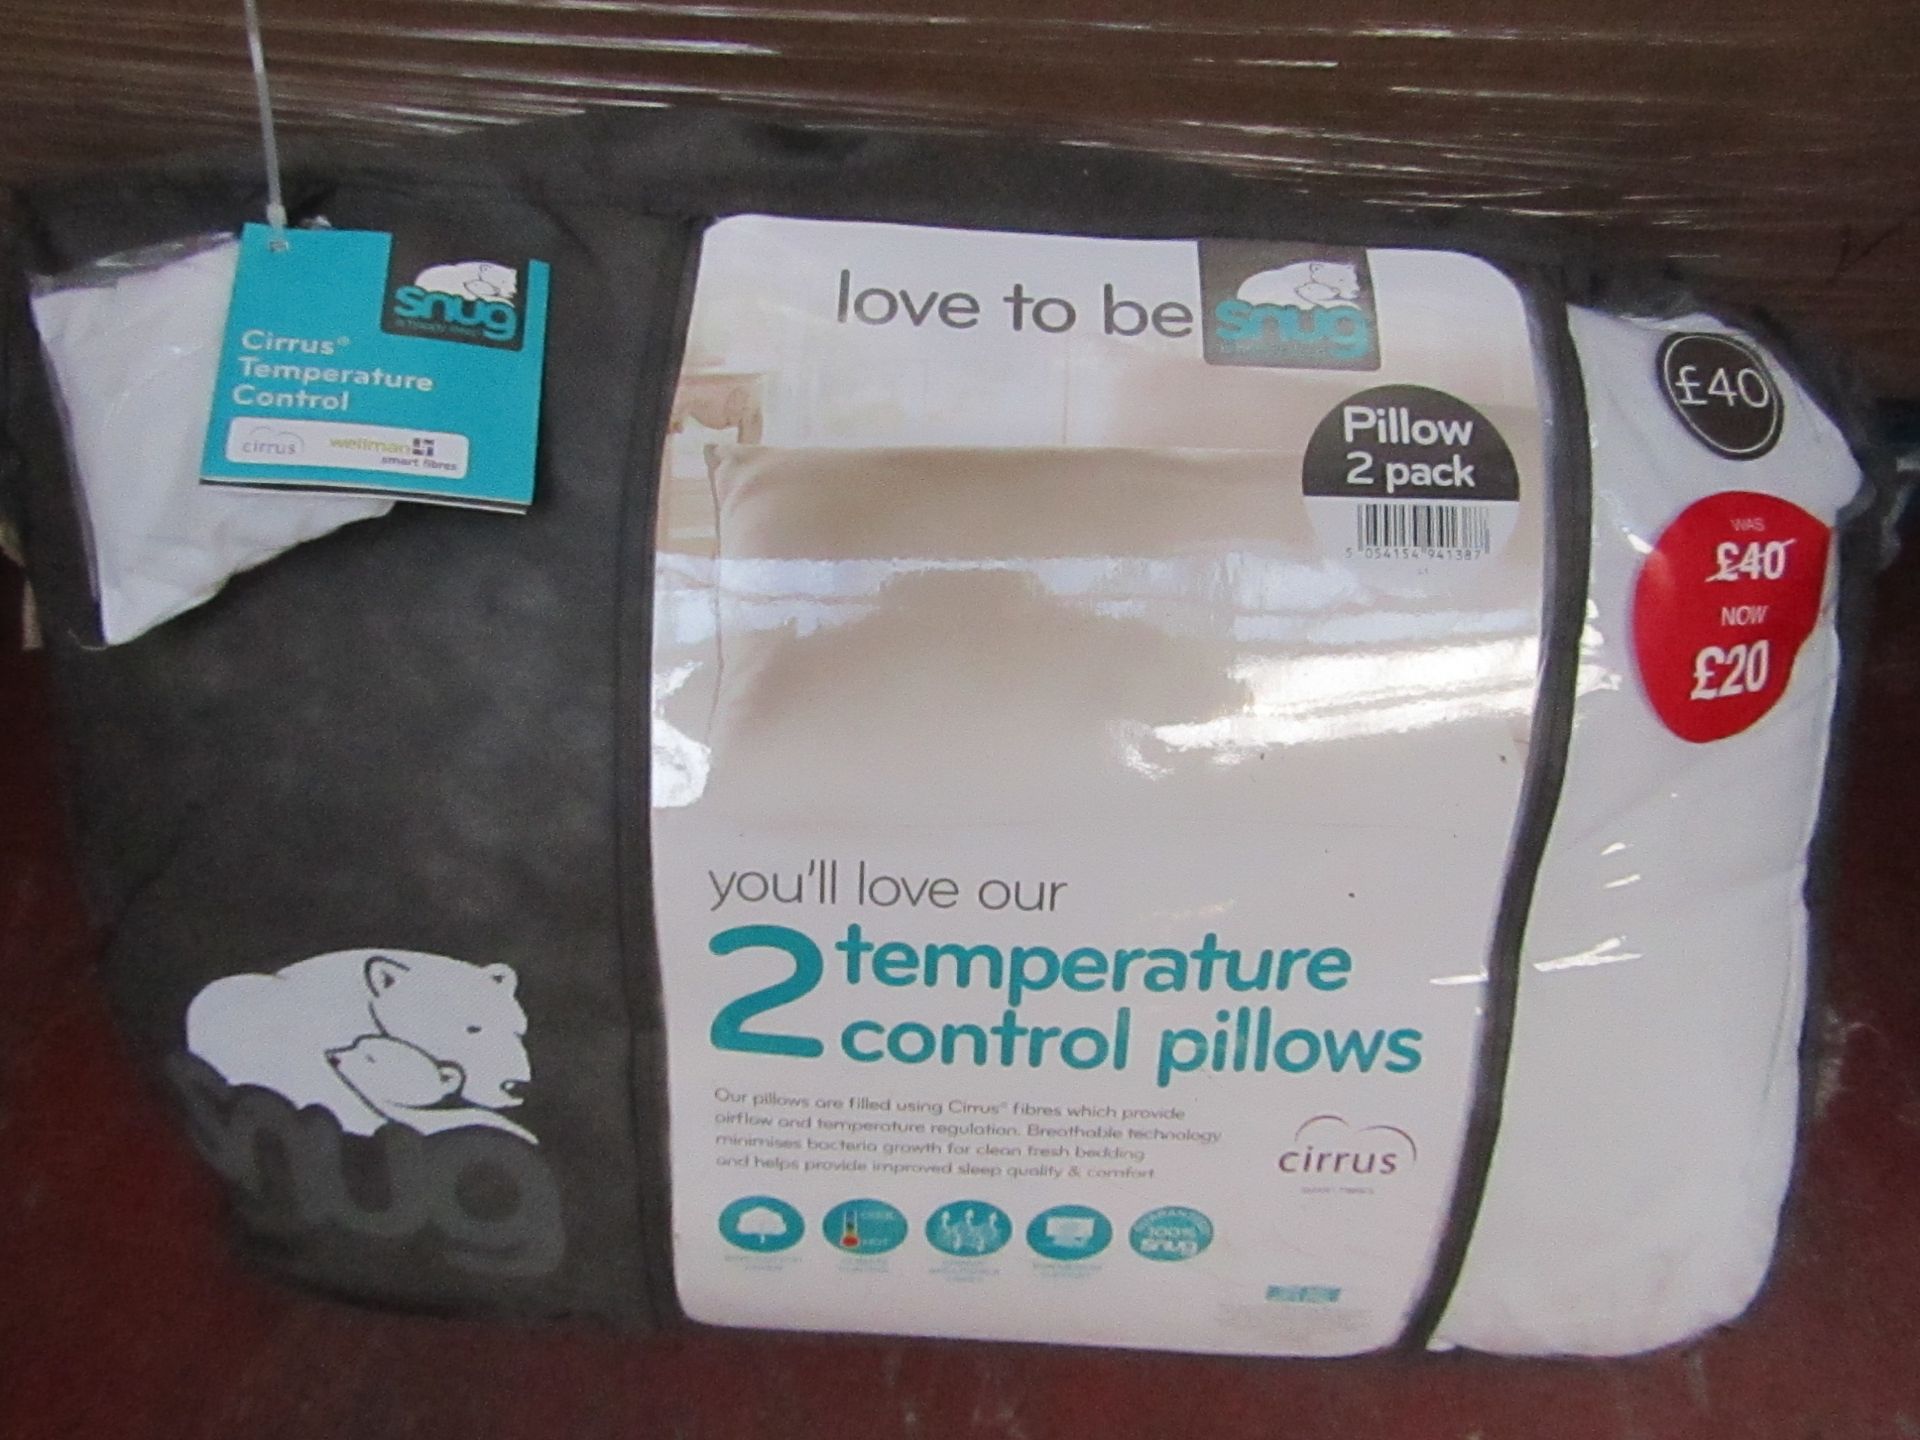 Snug pack of 2 temperature control pillows, brand new and packaged, RRP £40